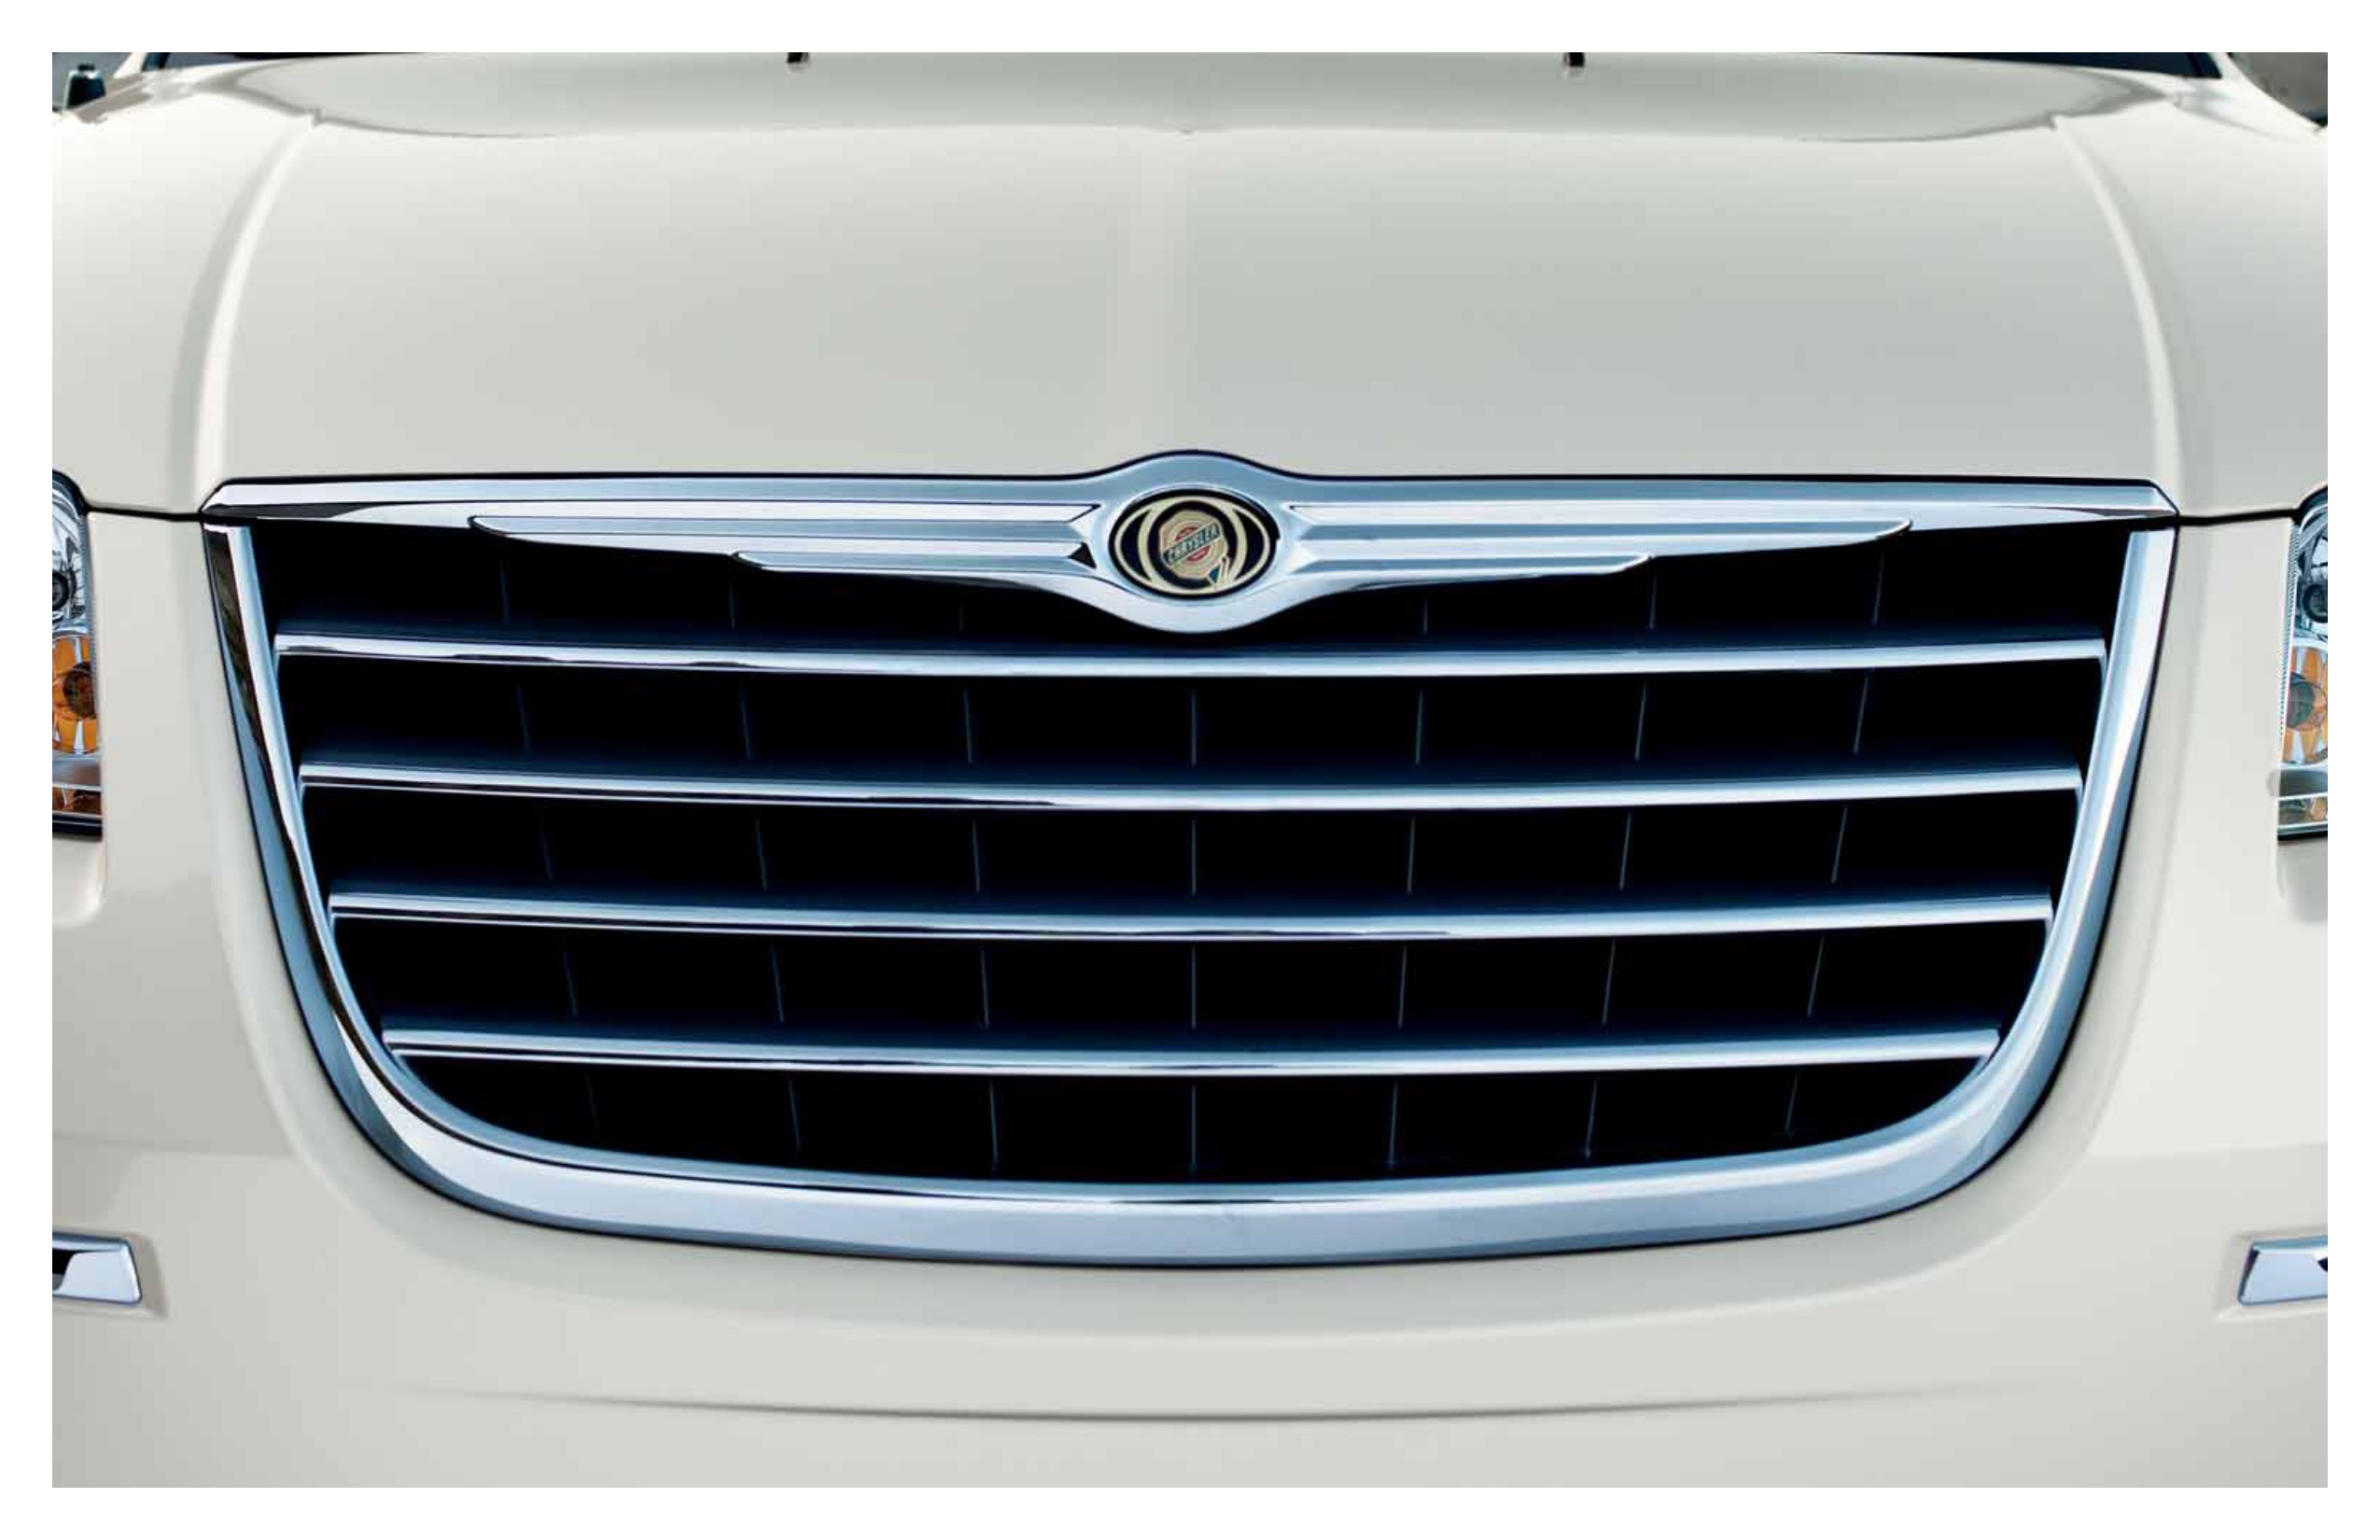 2010 Chrysler Town & Country Brochure Page 20